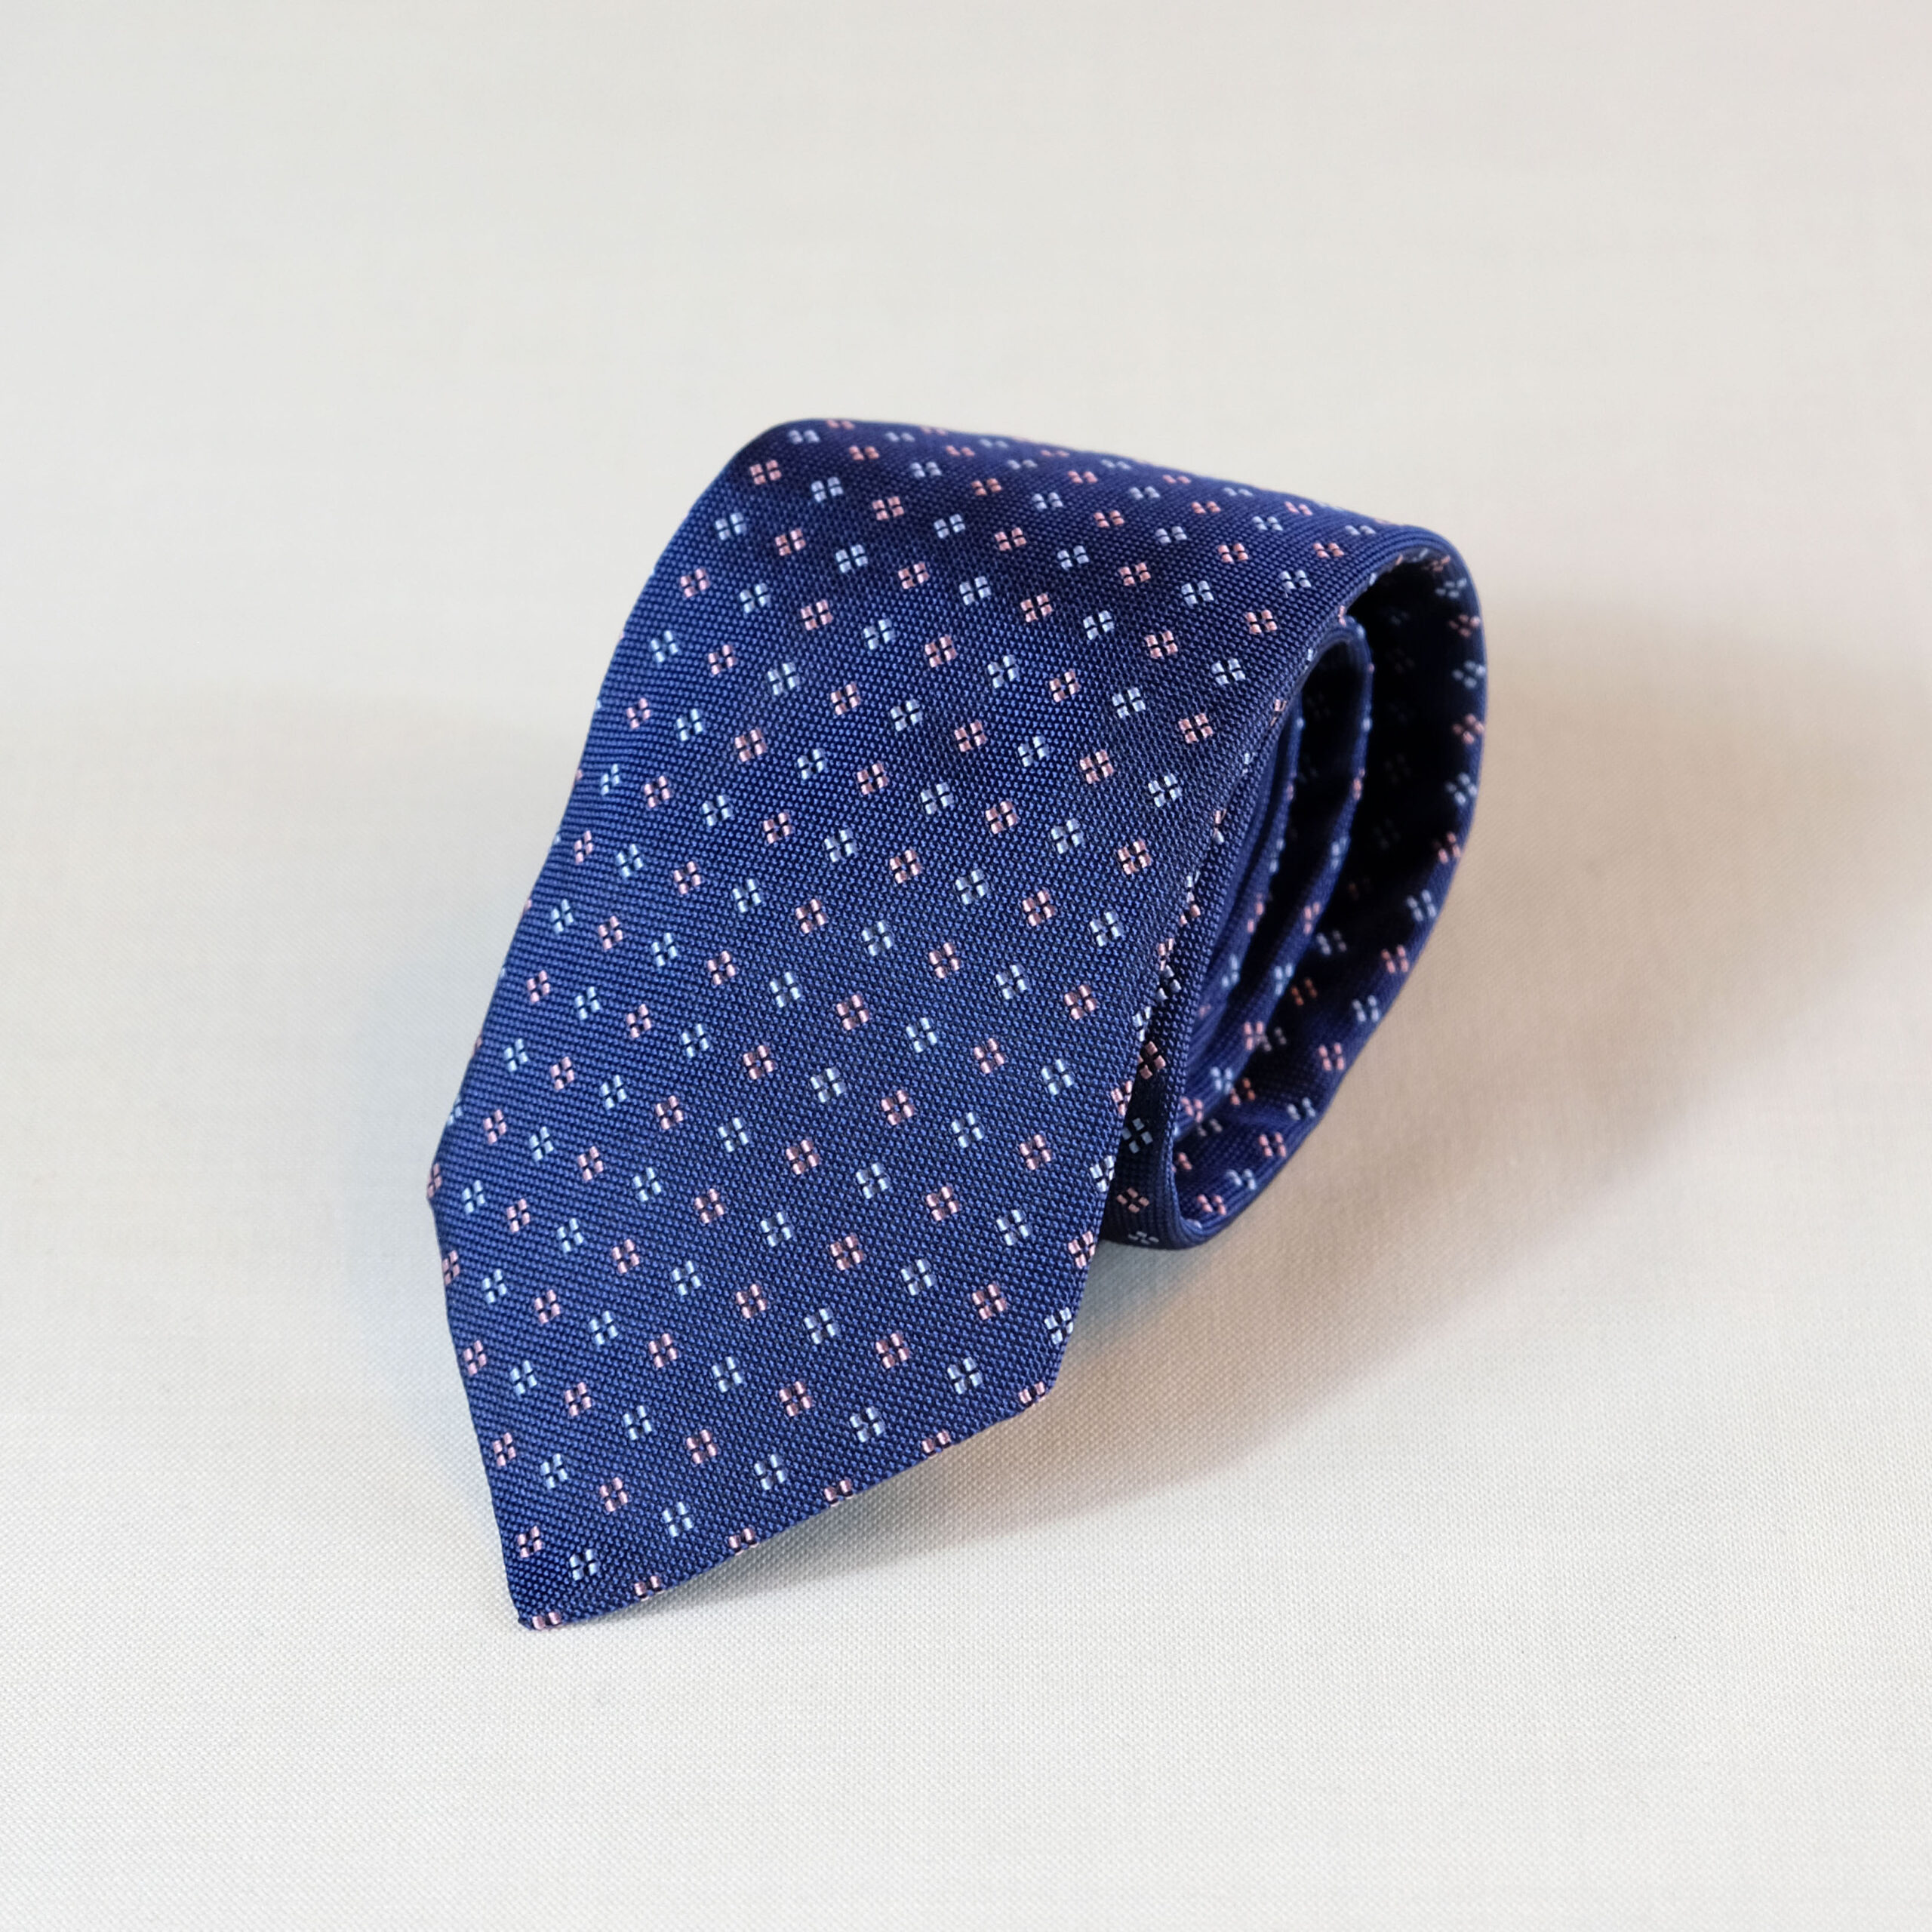 A blue tie with white and red squares on it.